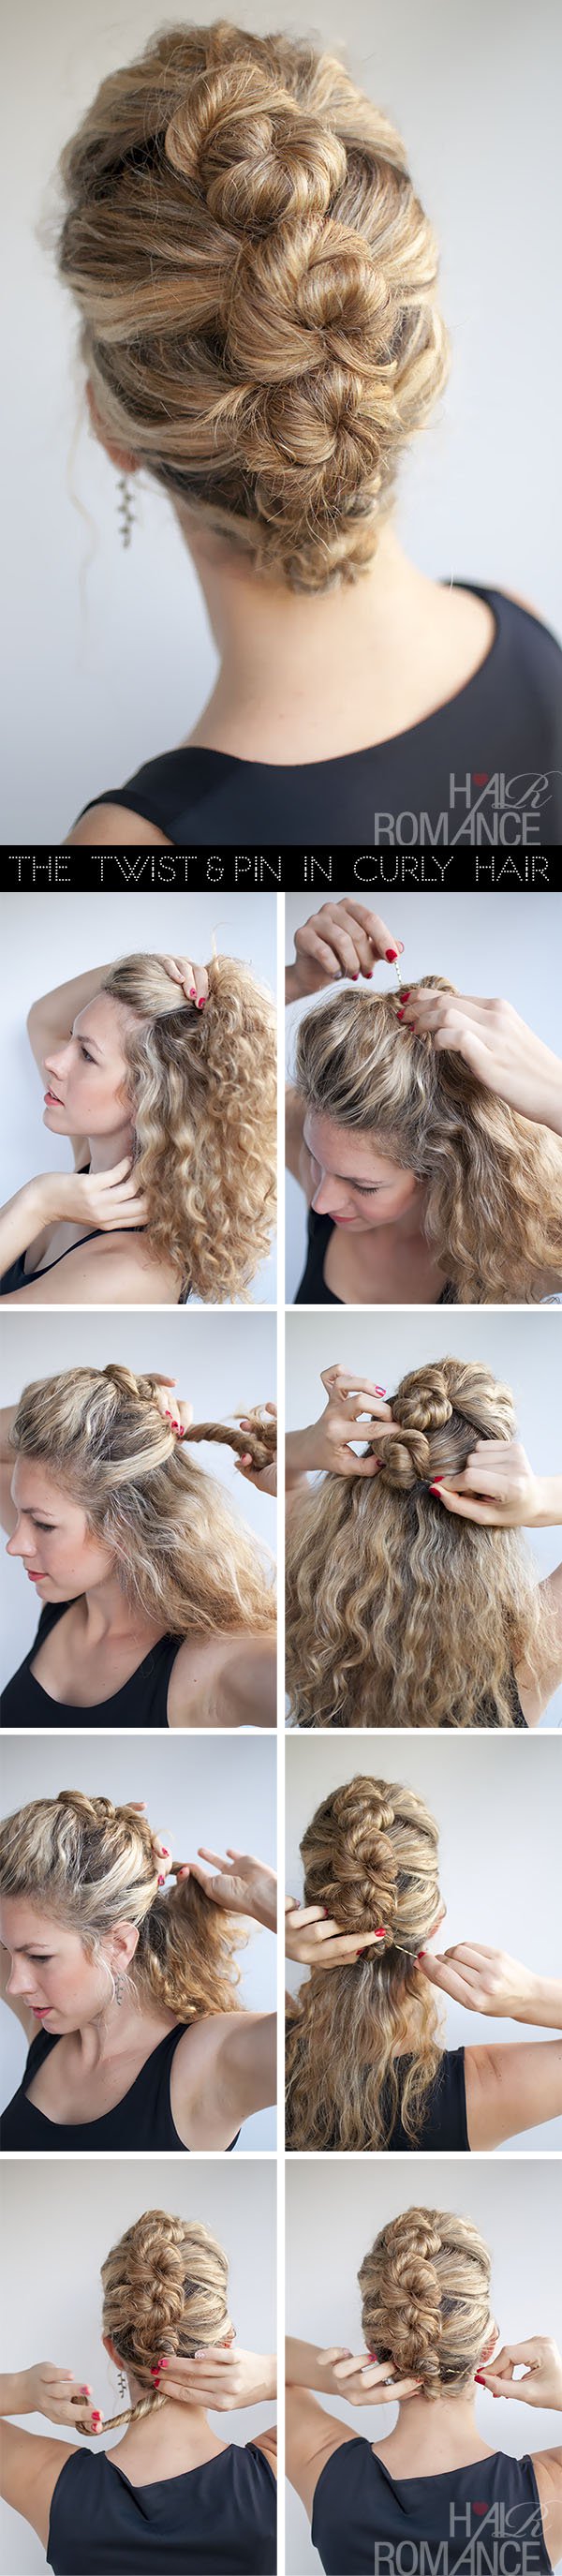 Pinned Updo Hairstyle for Curly Hair